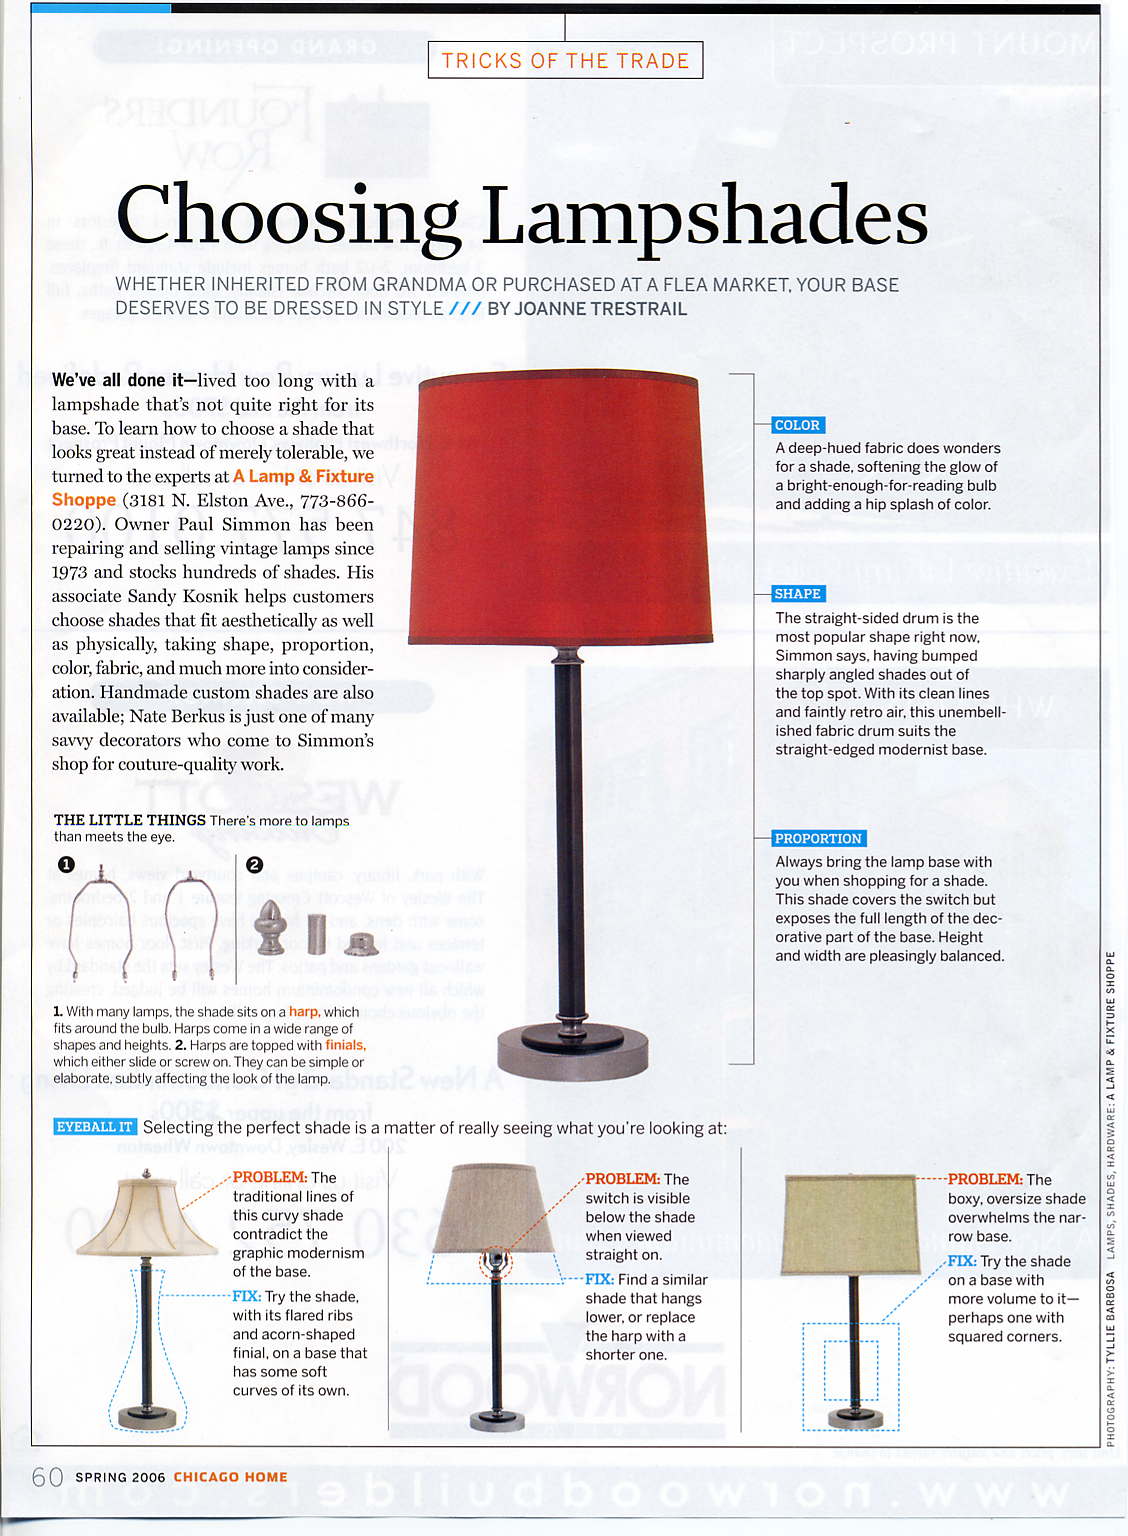 How To Choose The Right Lampshade - Image to u